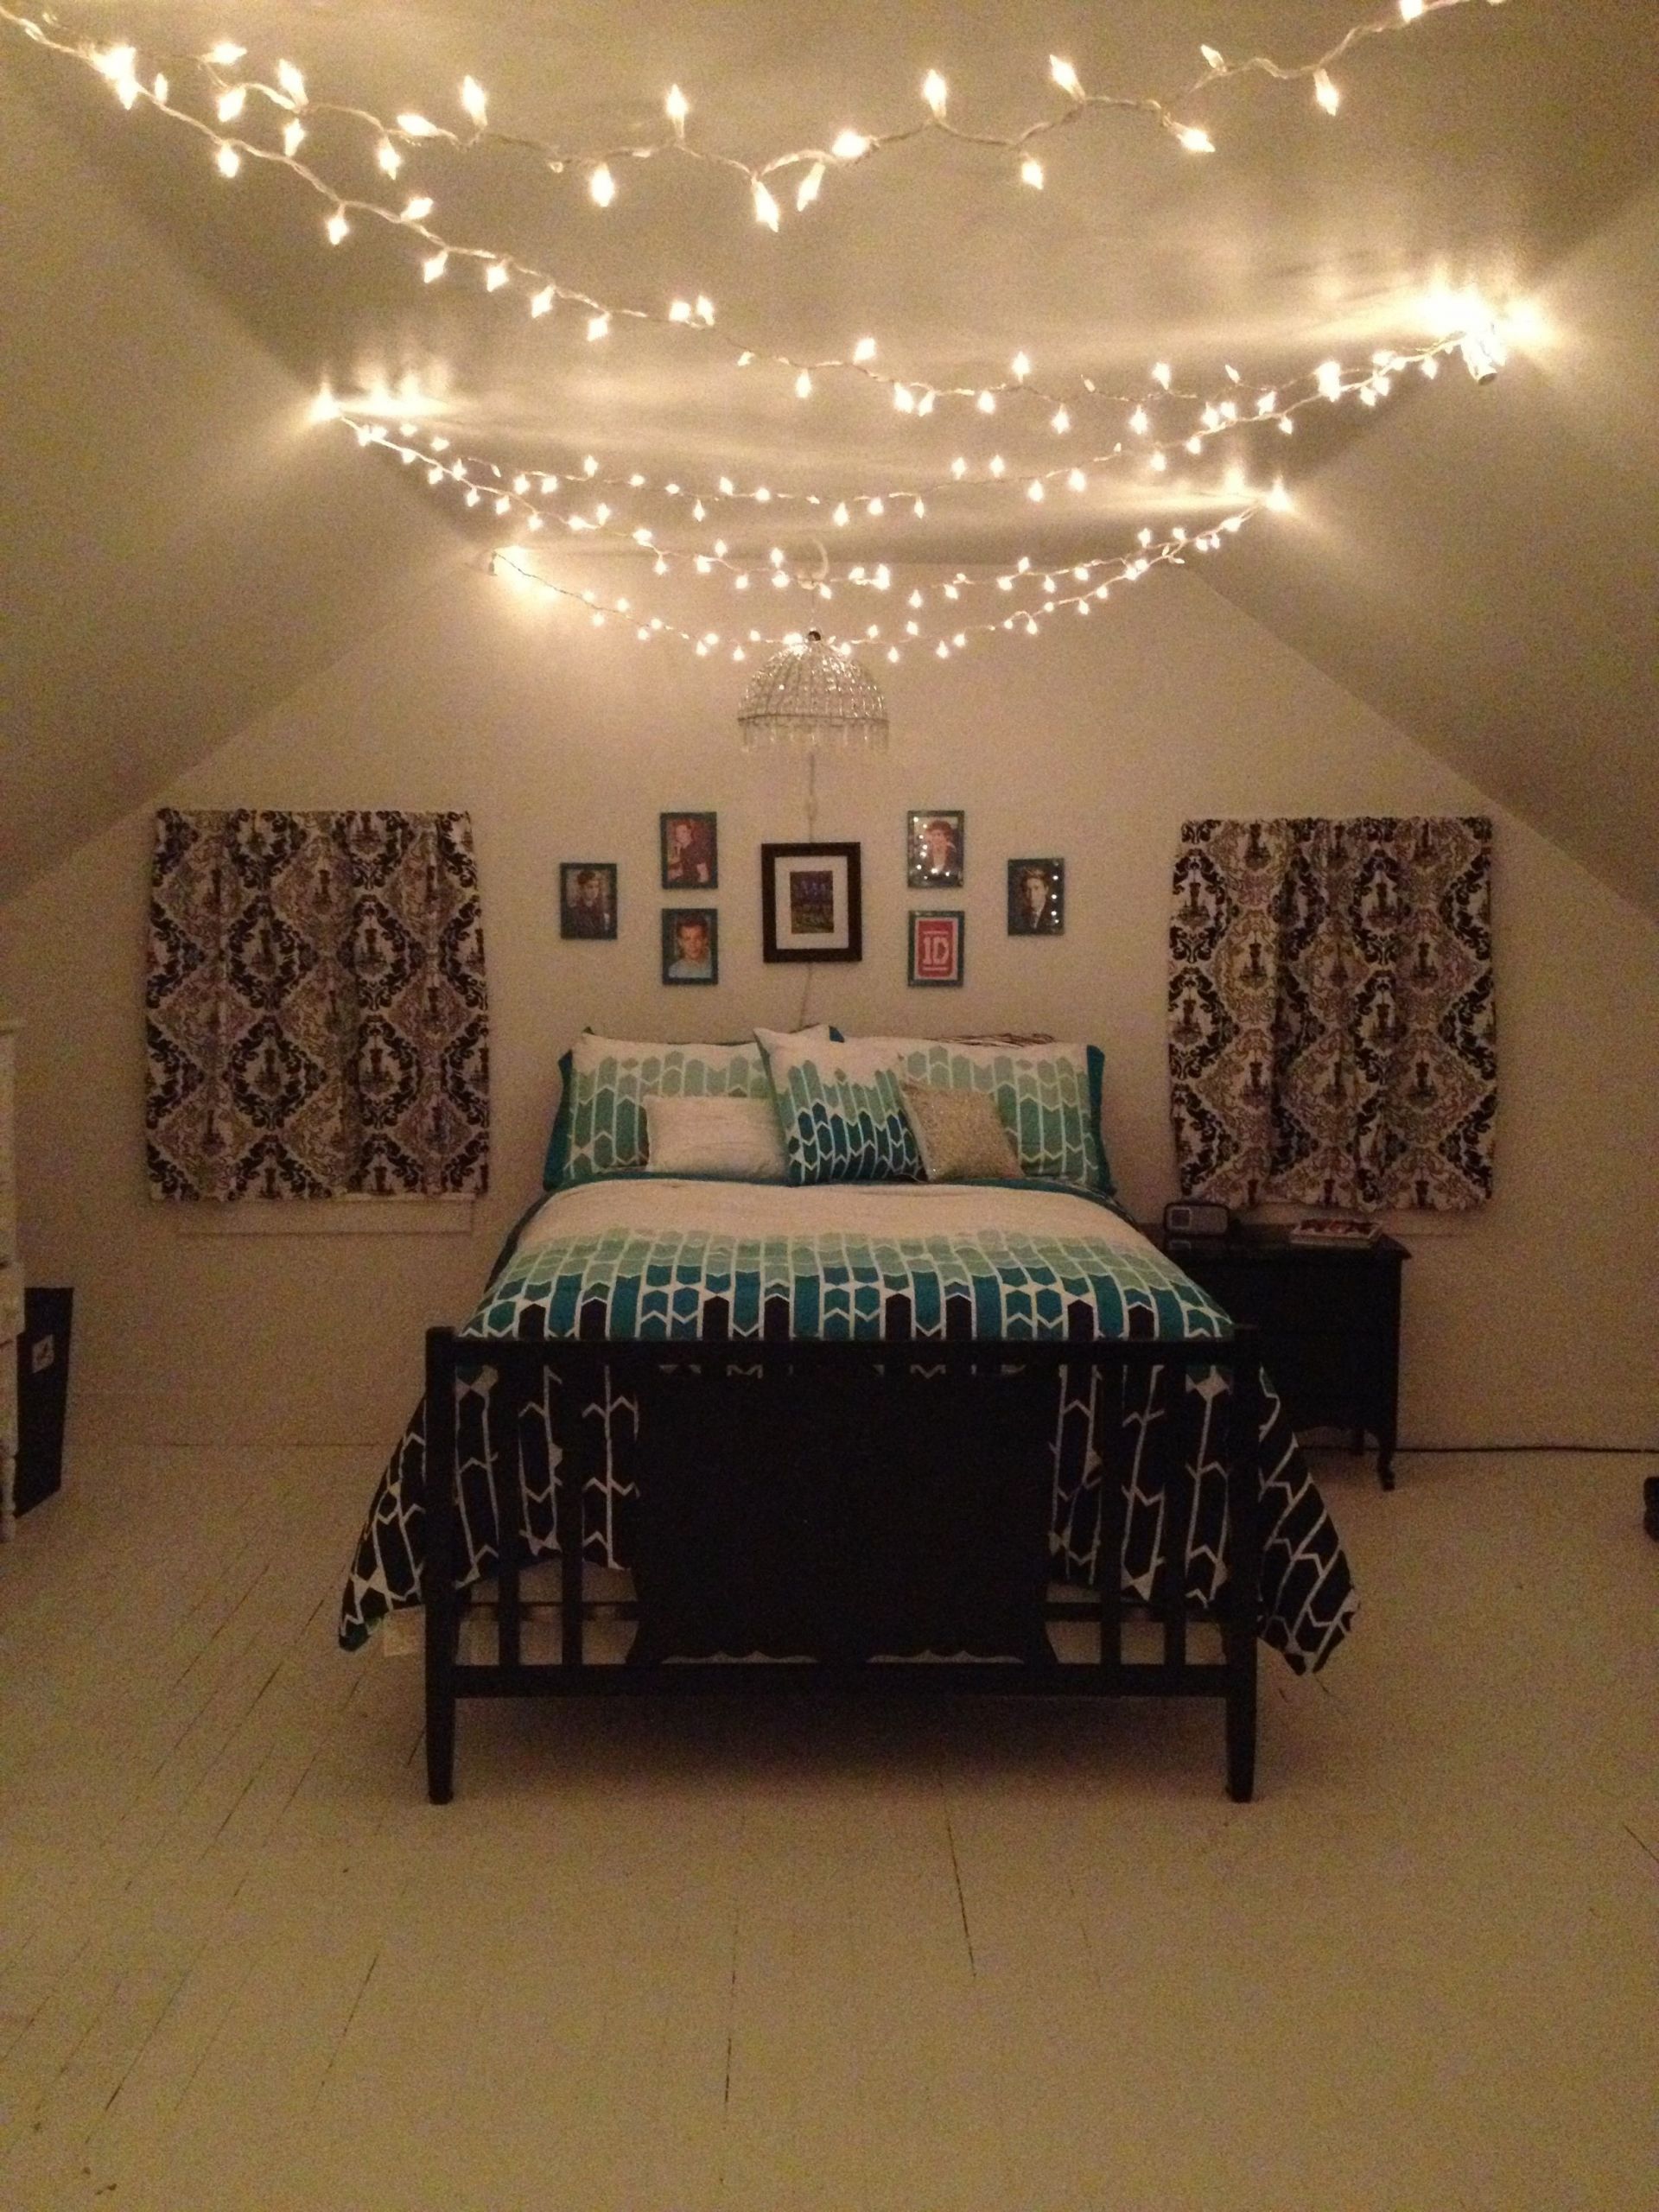 White Christmas Lights In Bedroom
 Pin on Marley s room ideas